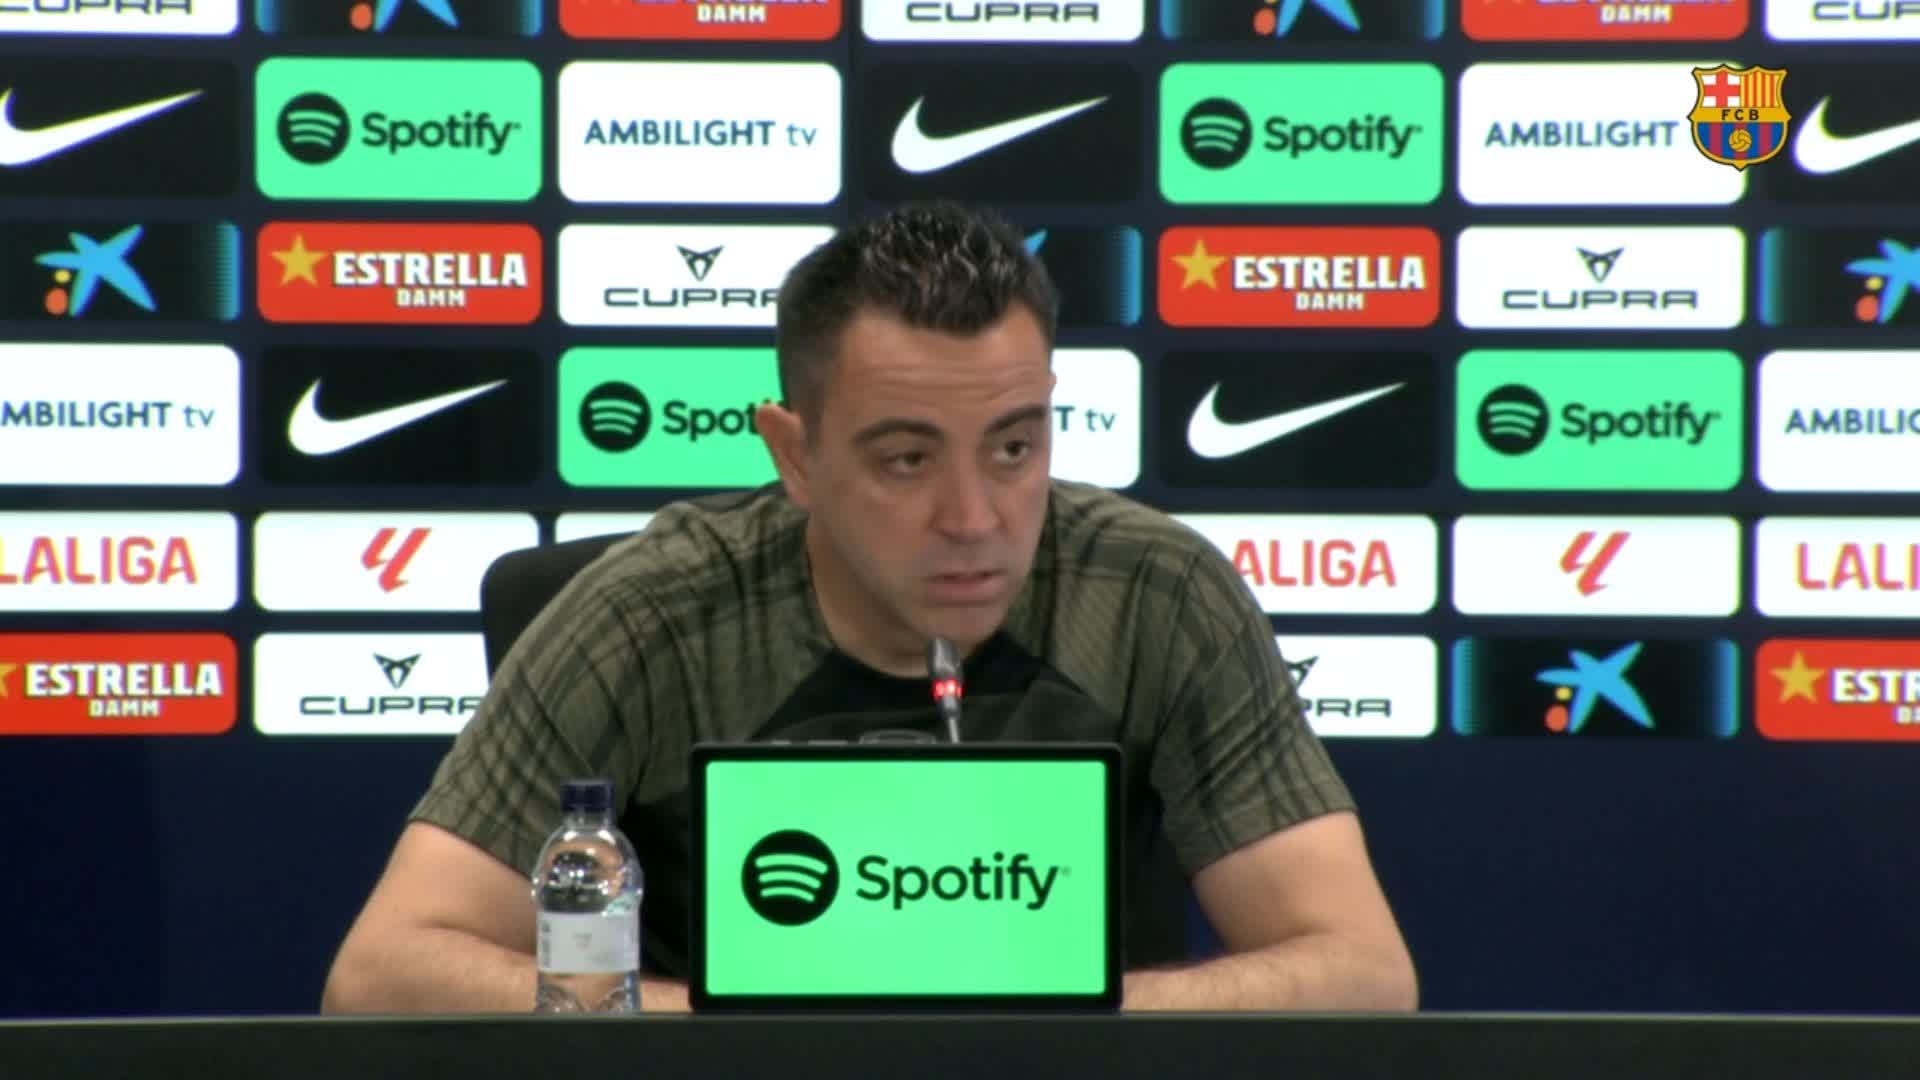 “Don’t ask me about this anymore” – Xavi Hernandez snaps back at question on Barcelona star’s future